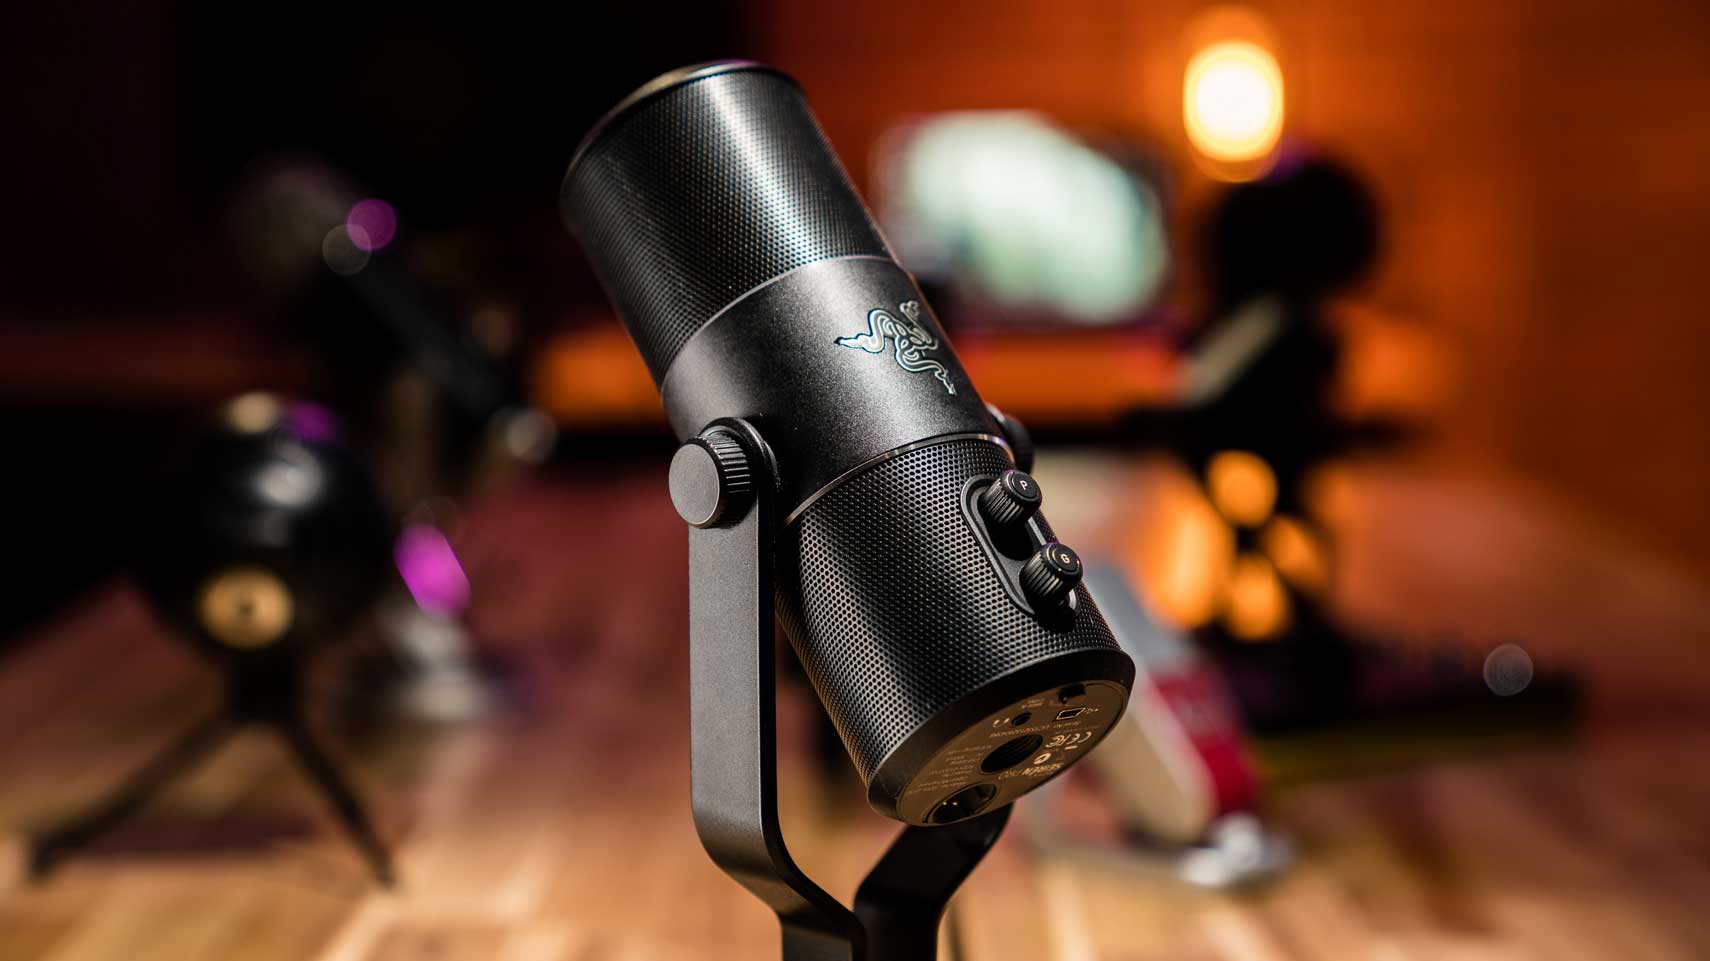 Best Budget Microphones For Streaming 2020